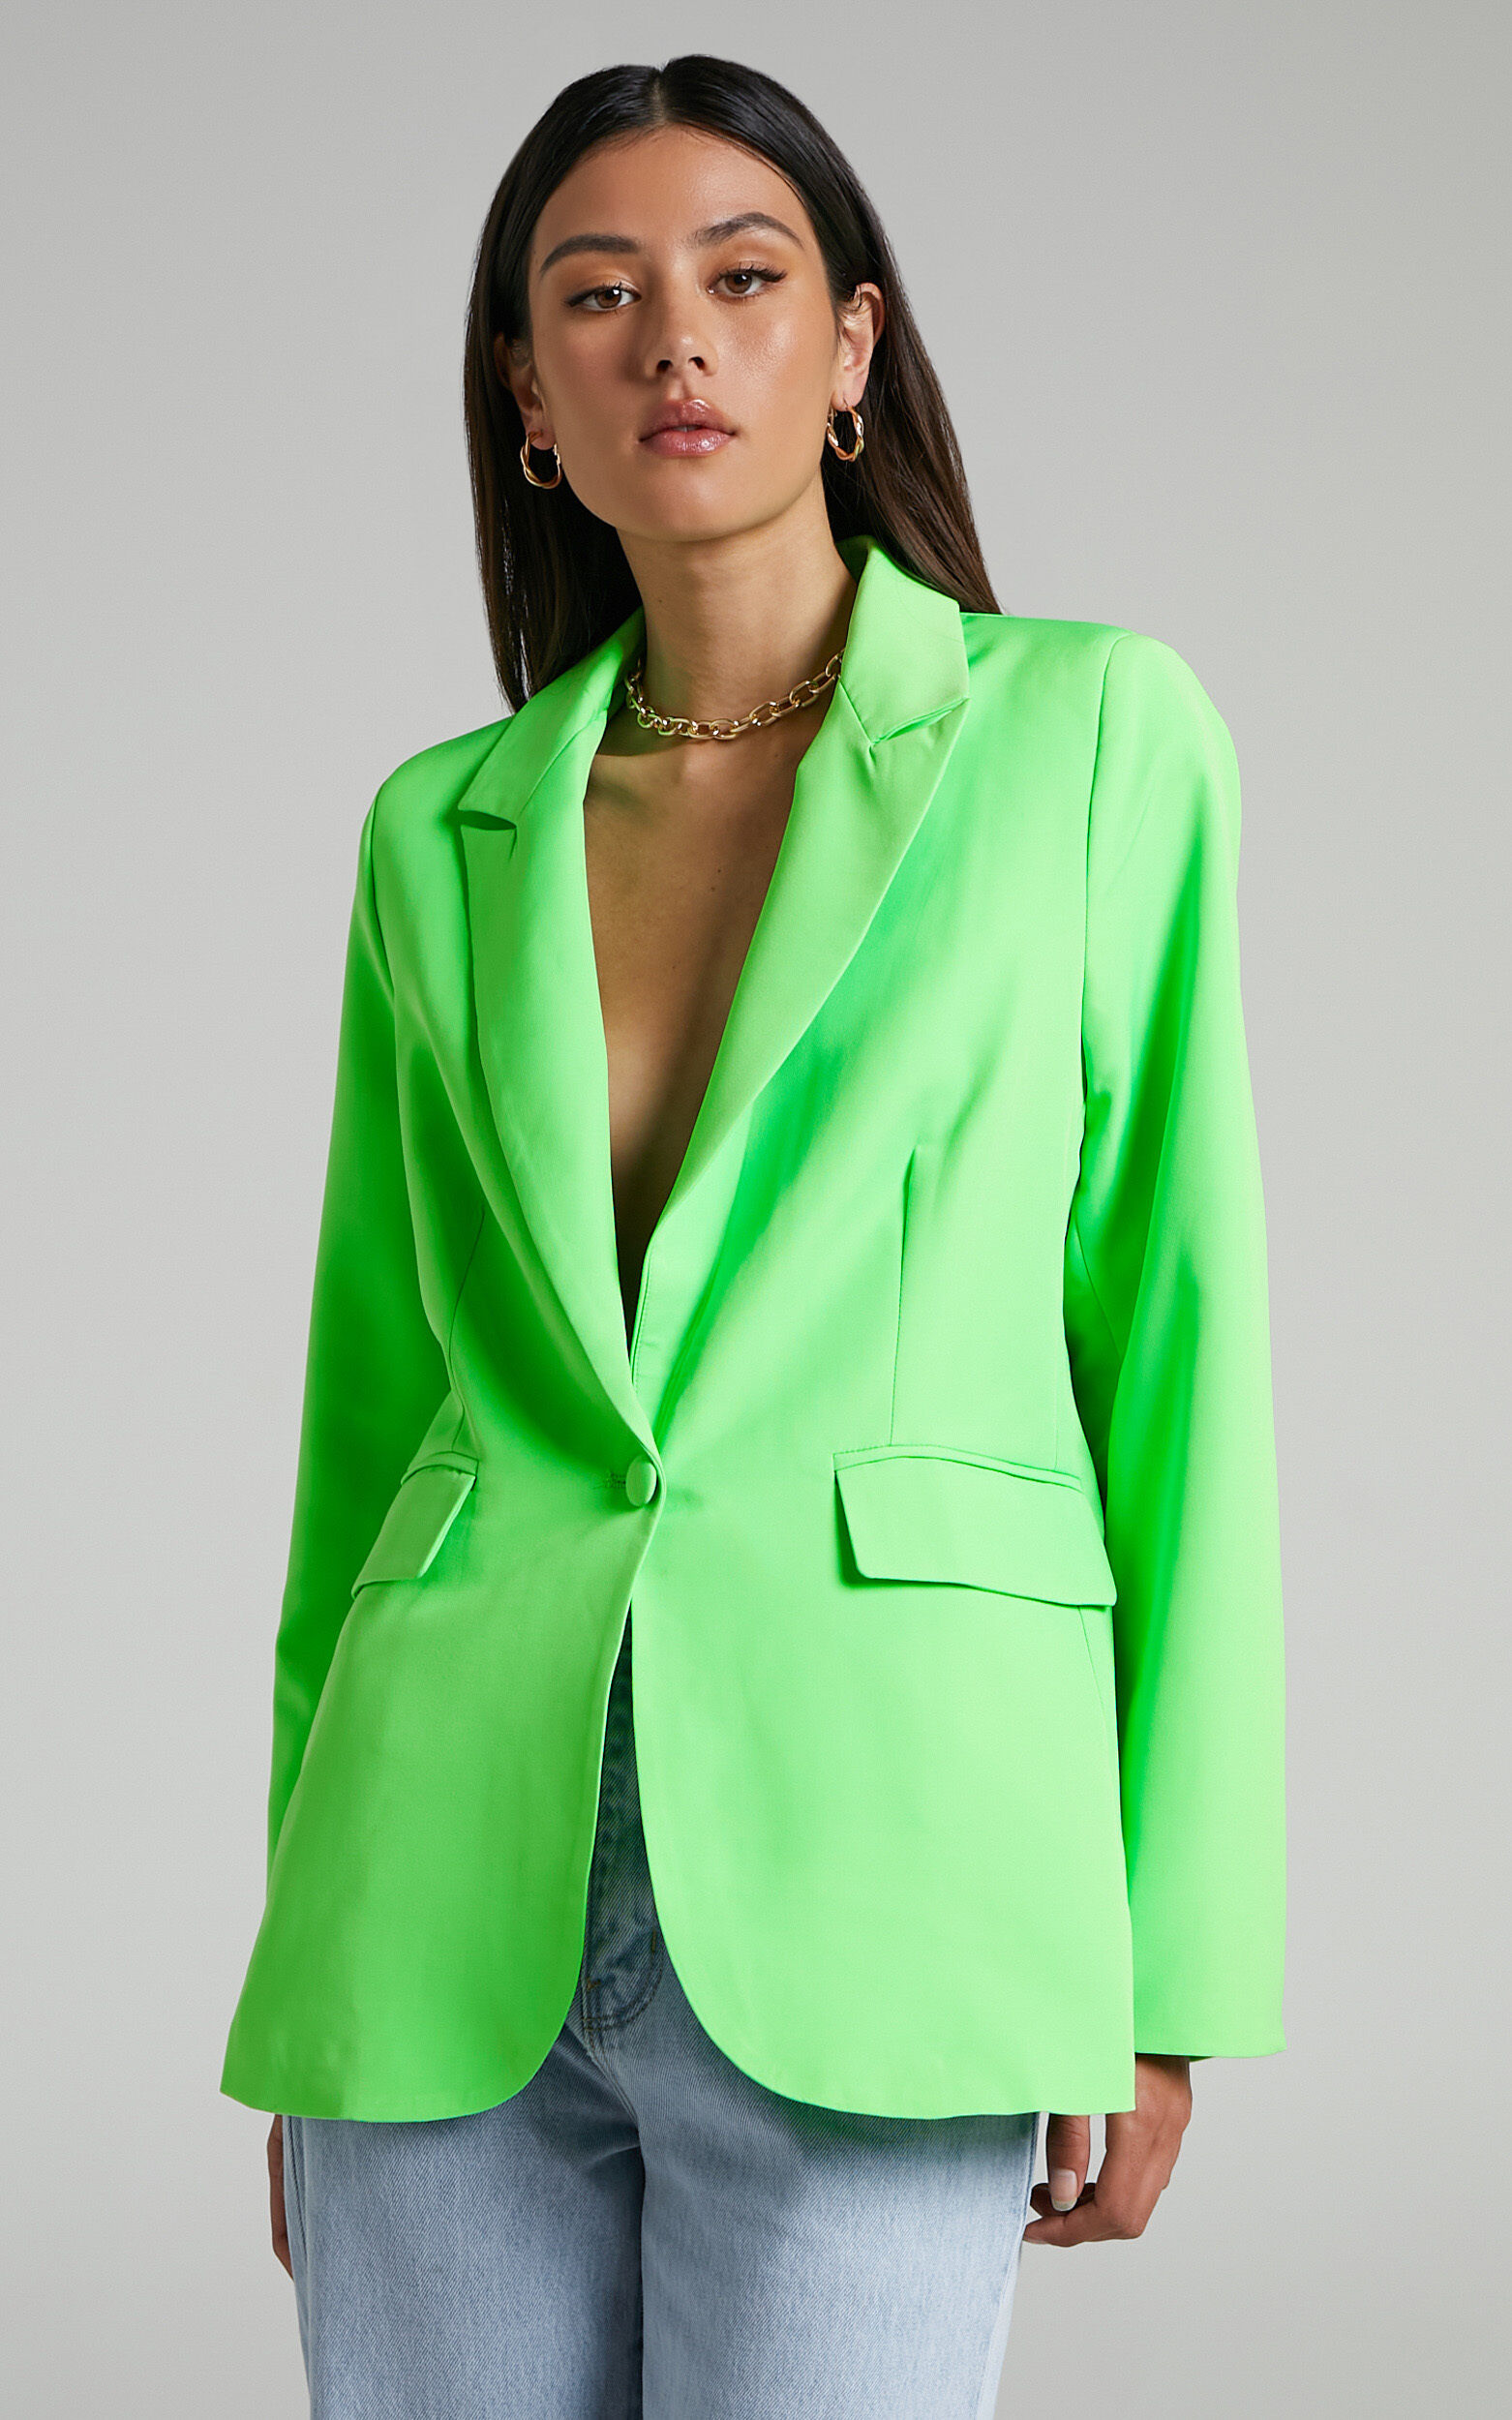 Ashesha Tailored Suiting Blazer in Green - 04, GRN1, super-hi-res image number null